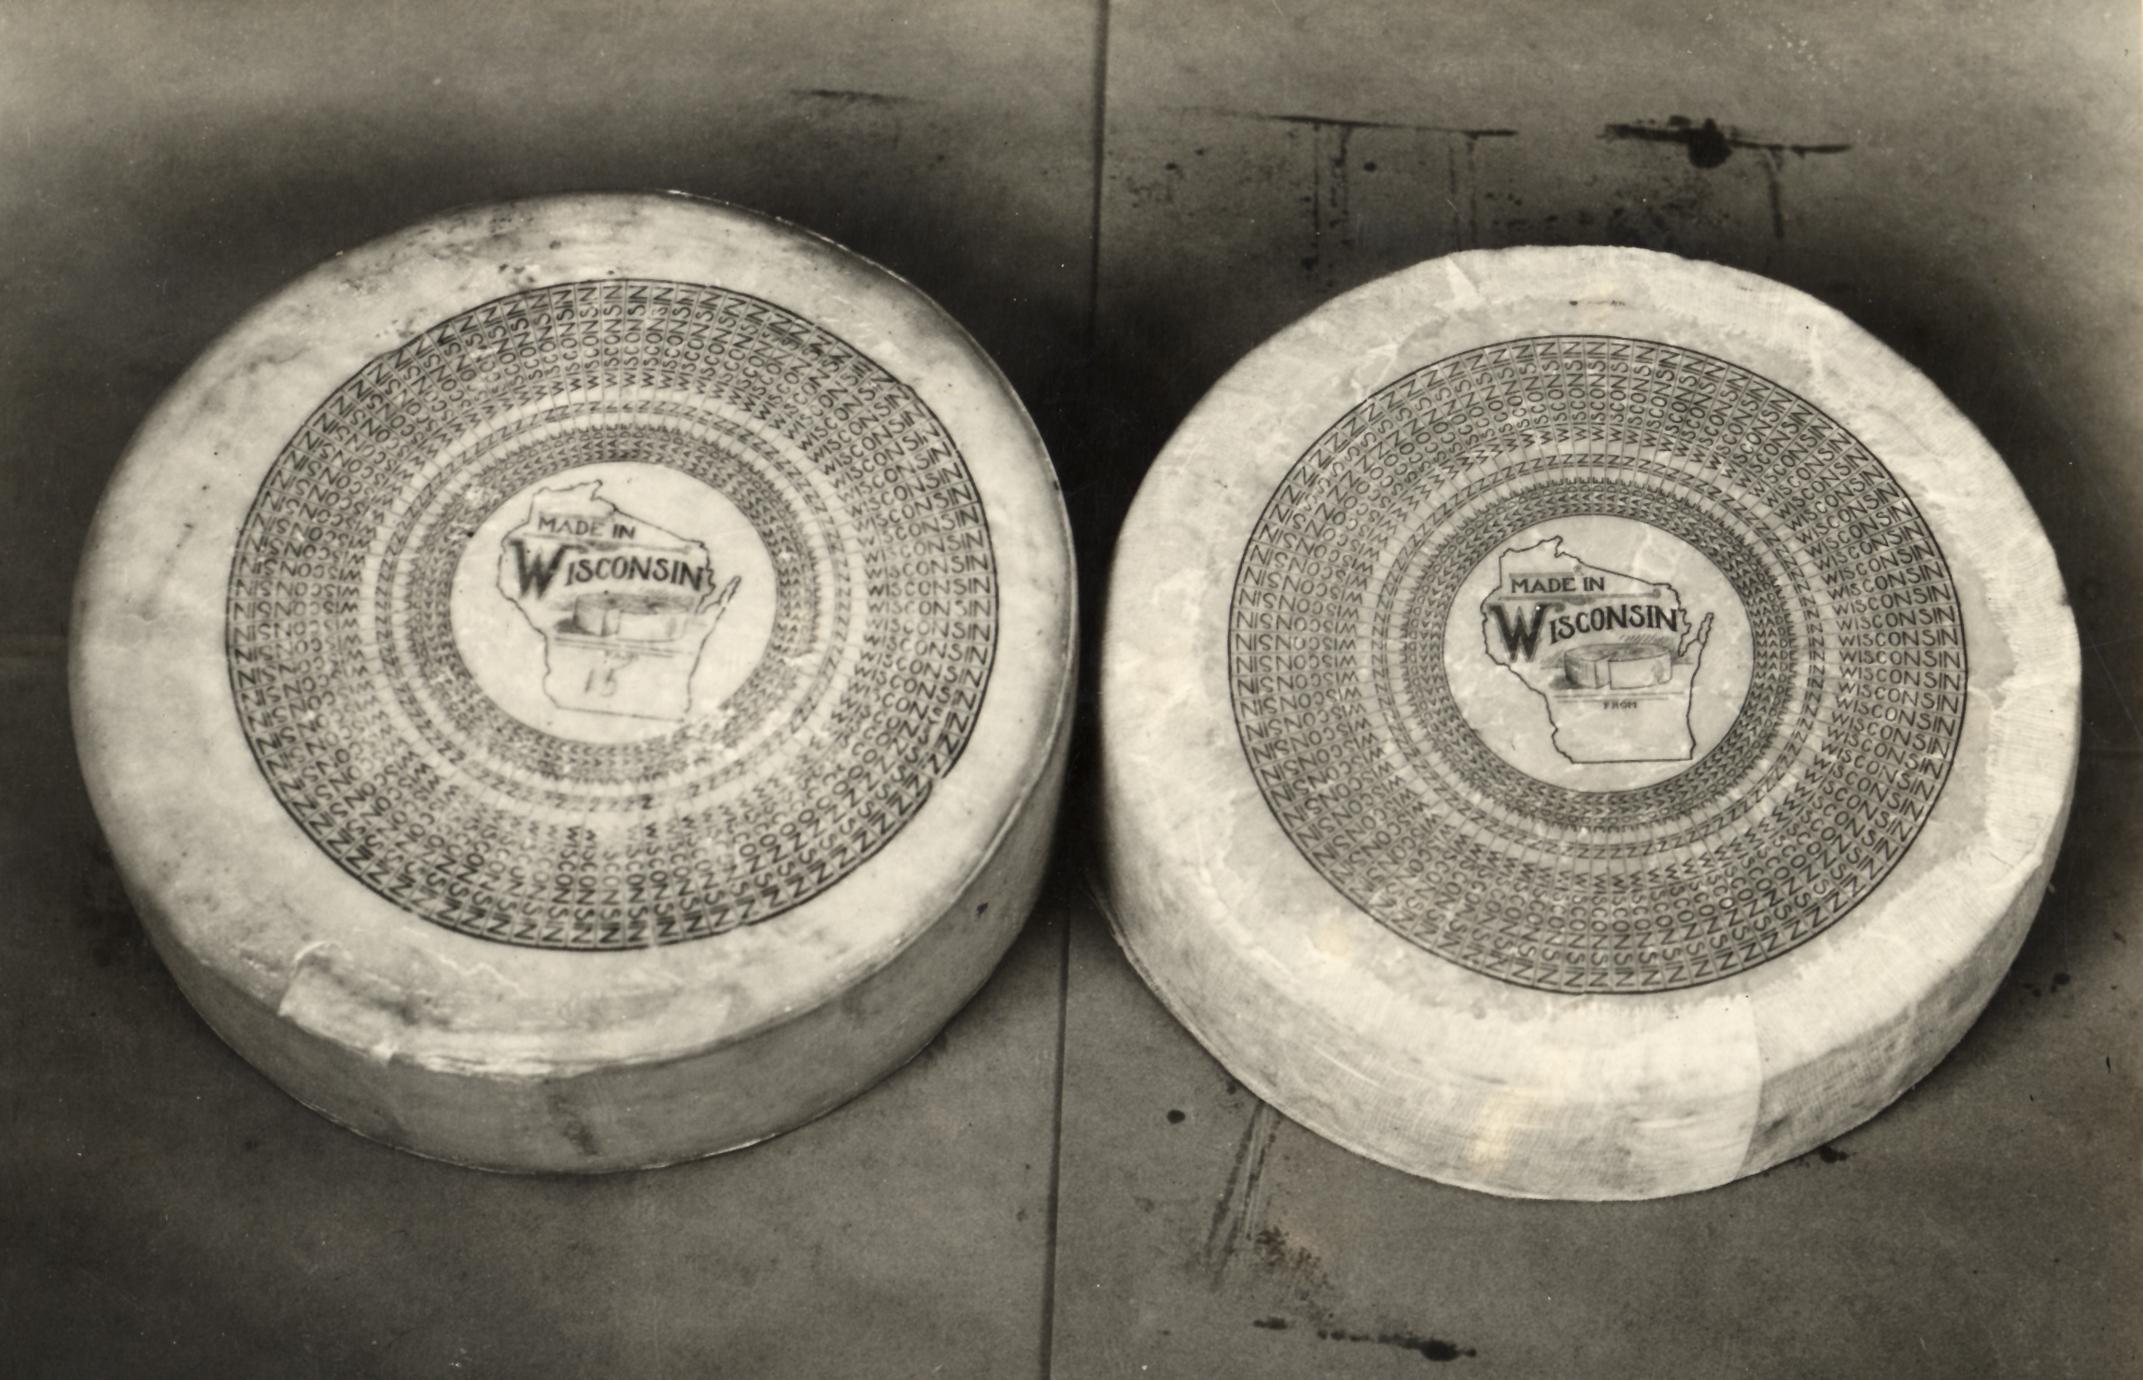 Cheese with Made in Wisconsin trademark